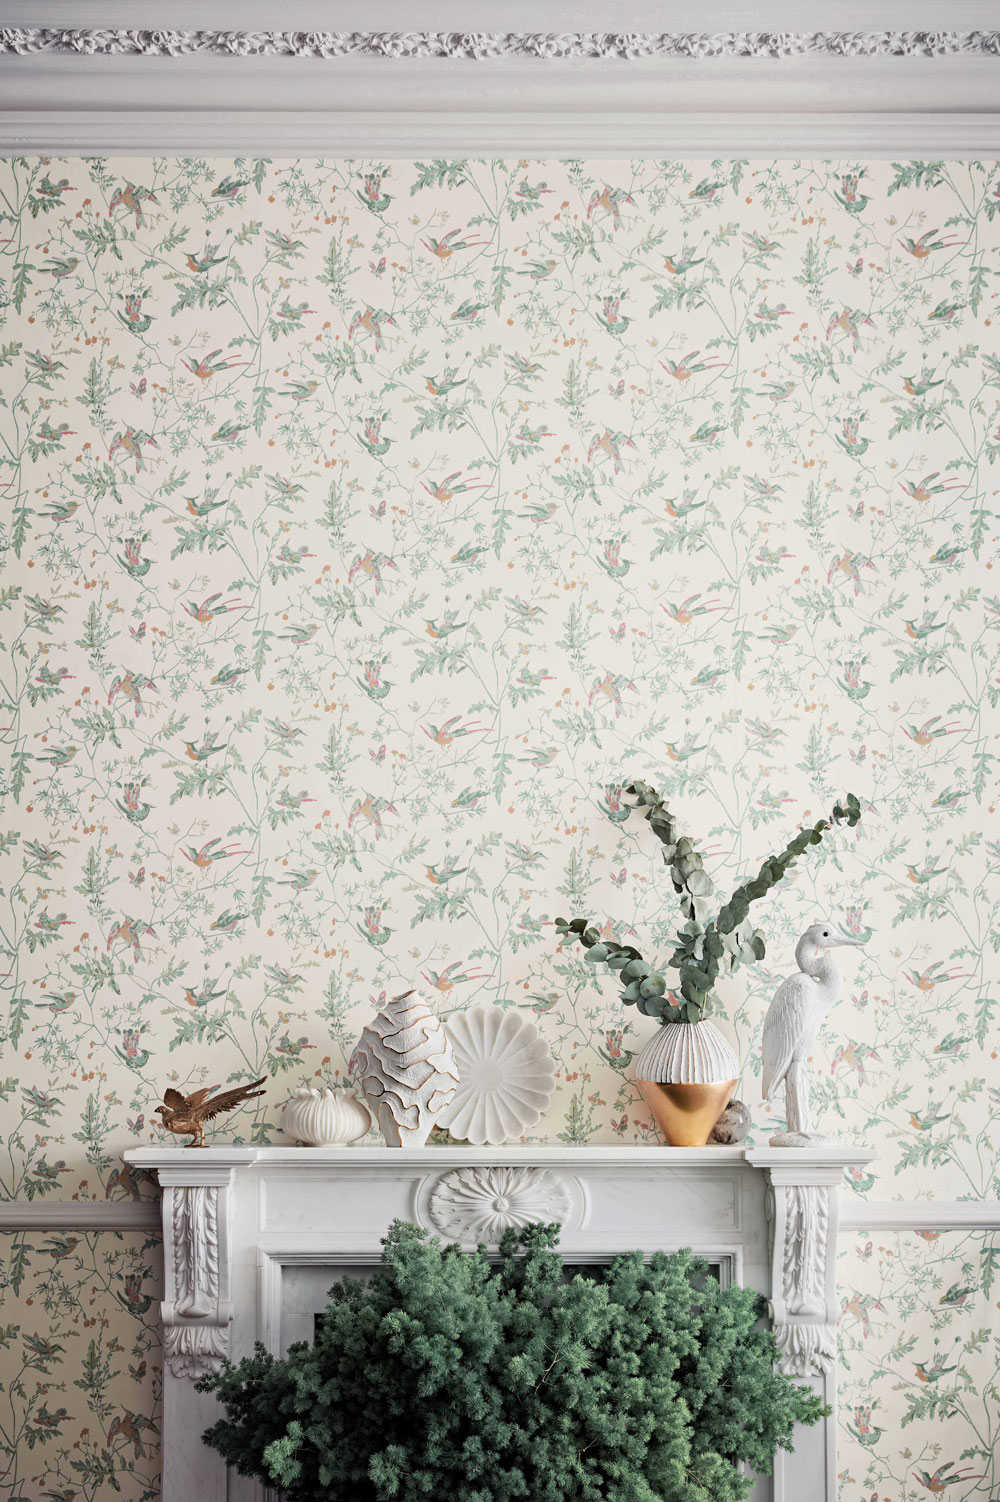 Hummingbirds Wallpaper - Pastel - by Cole & Son